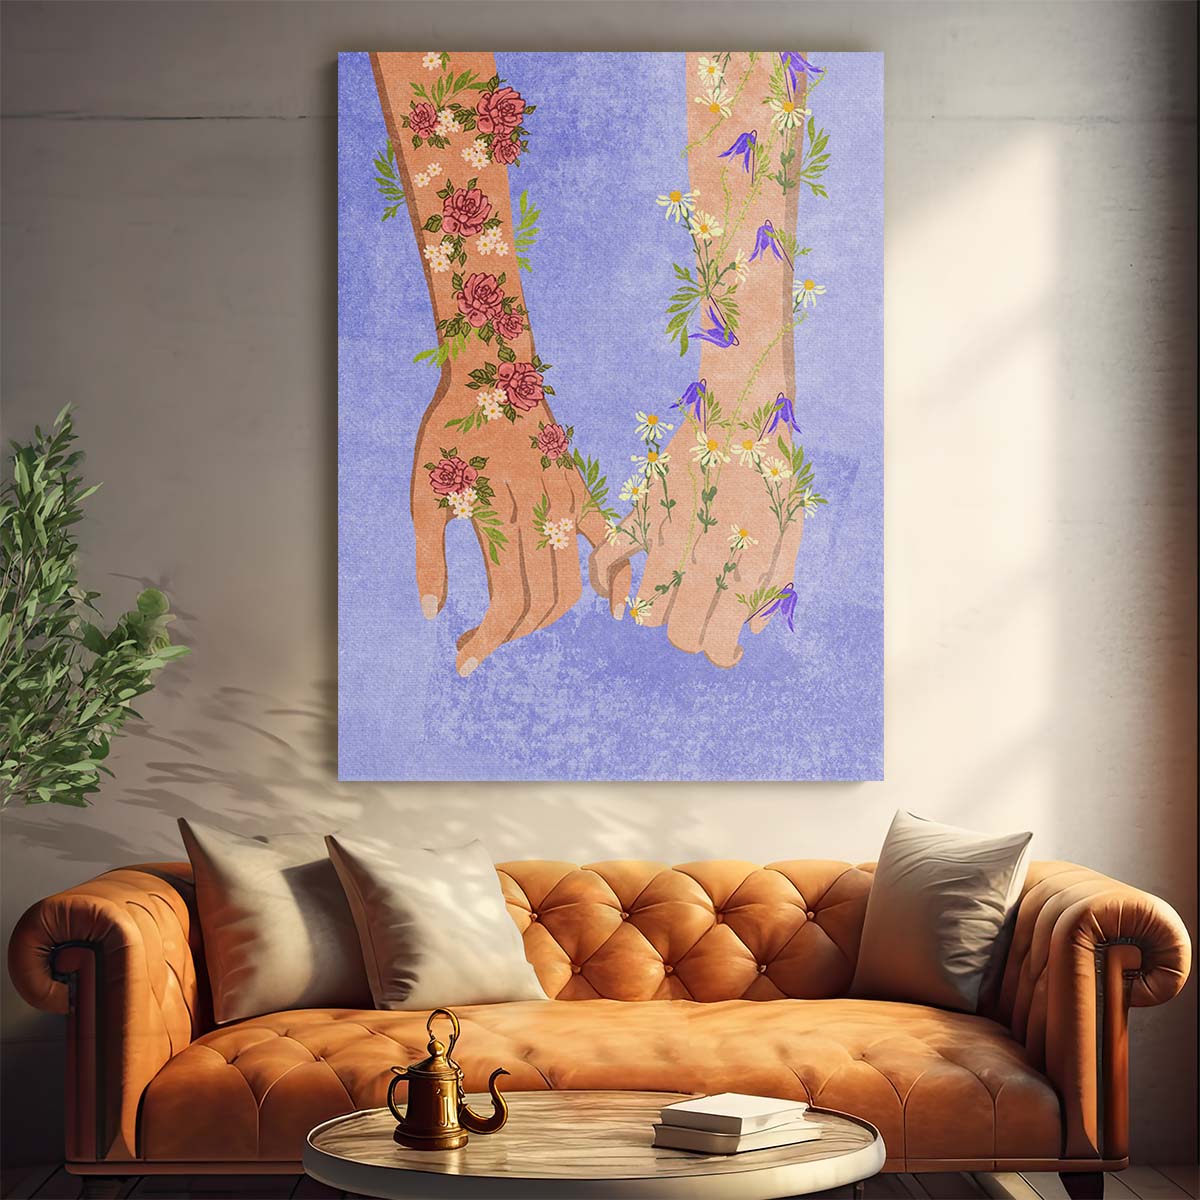 Floral Feminist Illustration Holding Hands by Raissa Oltmanns by Luxuriance Designs, made in USA